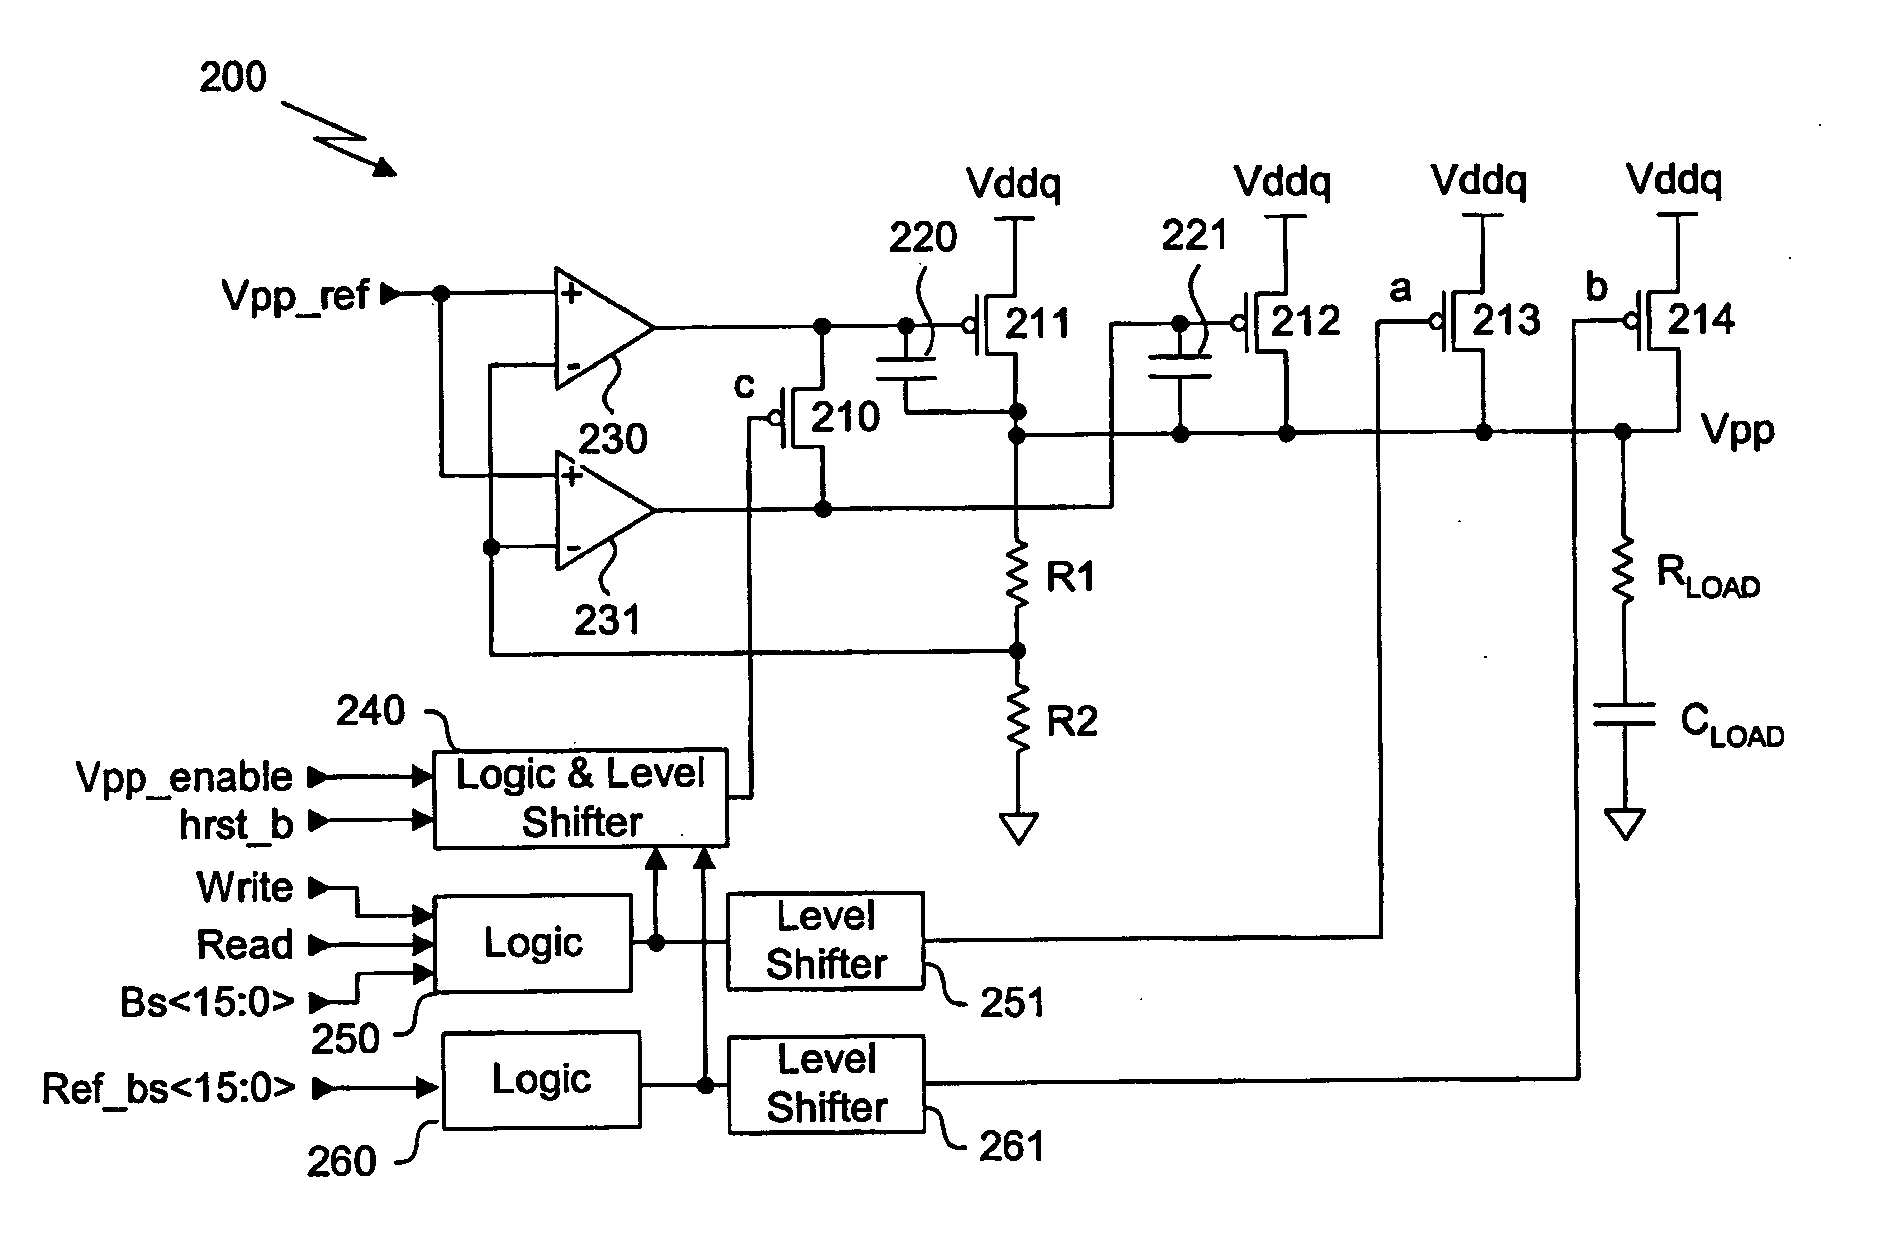 Voltage down converter for high speed memory